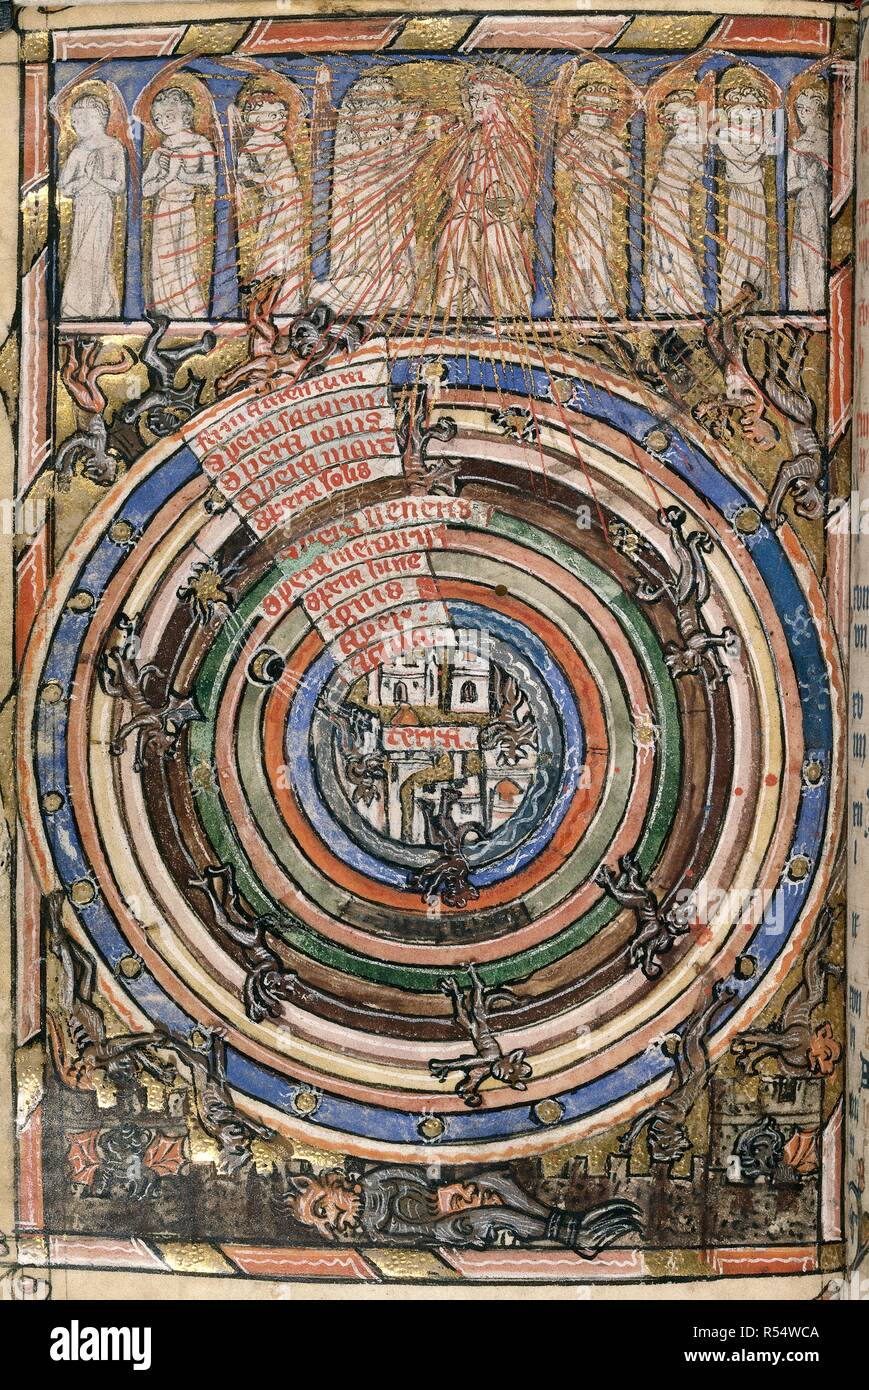 Table Of The Spheres Between Heaven And Hell The Earth In The Centre Surrounded By Concentric Circles Representing The Elements The Planets And In The Outer Circle The Stars At The Top